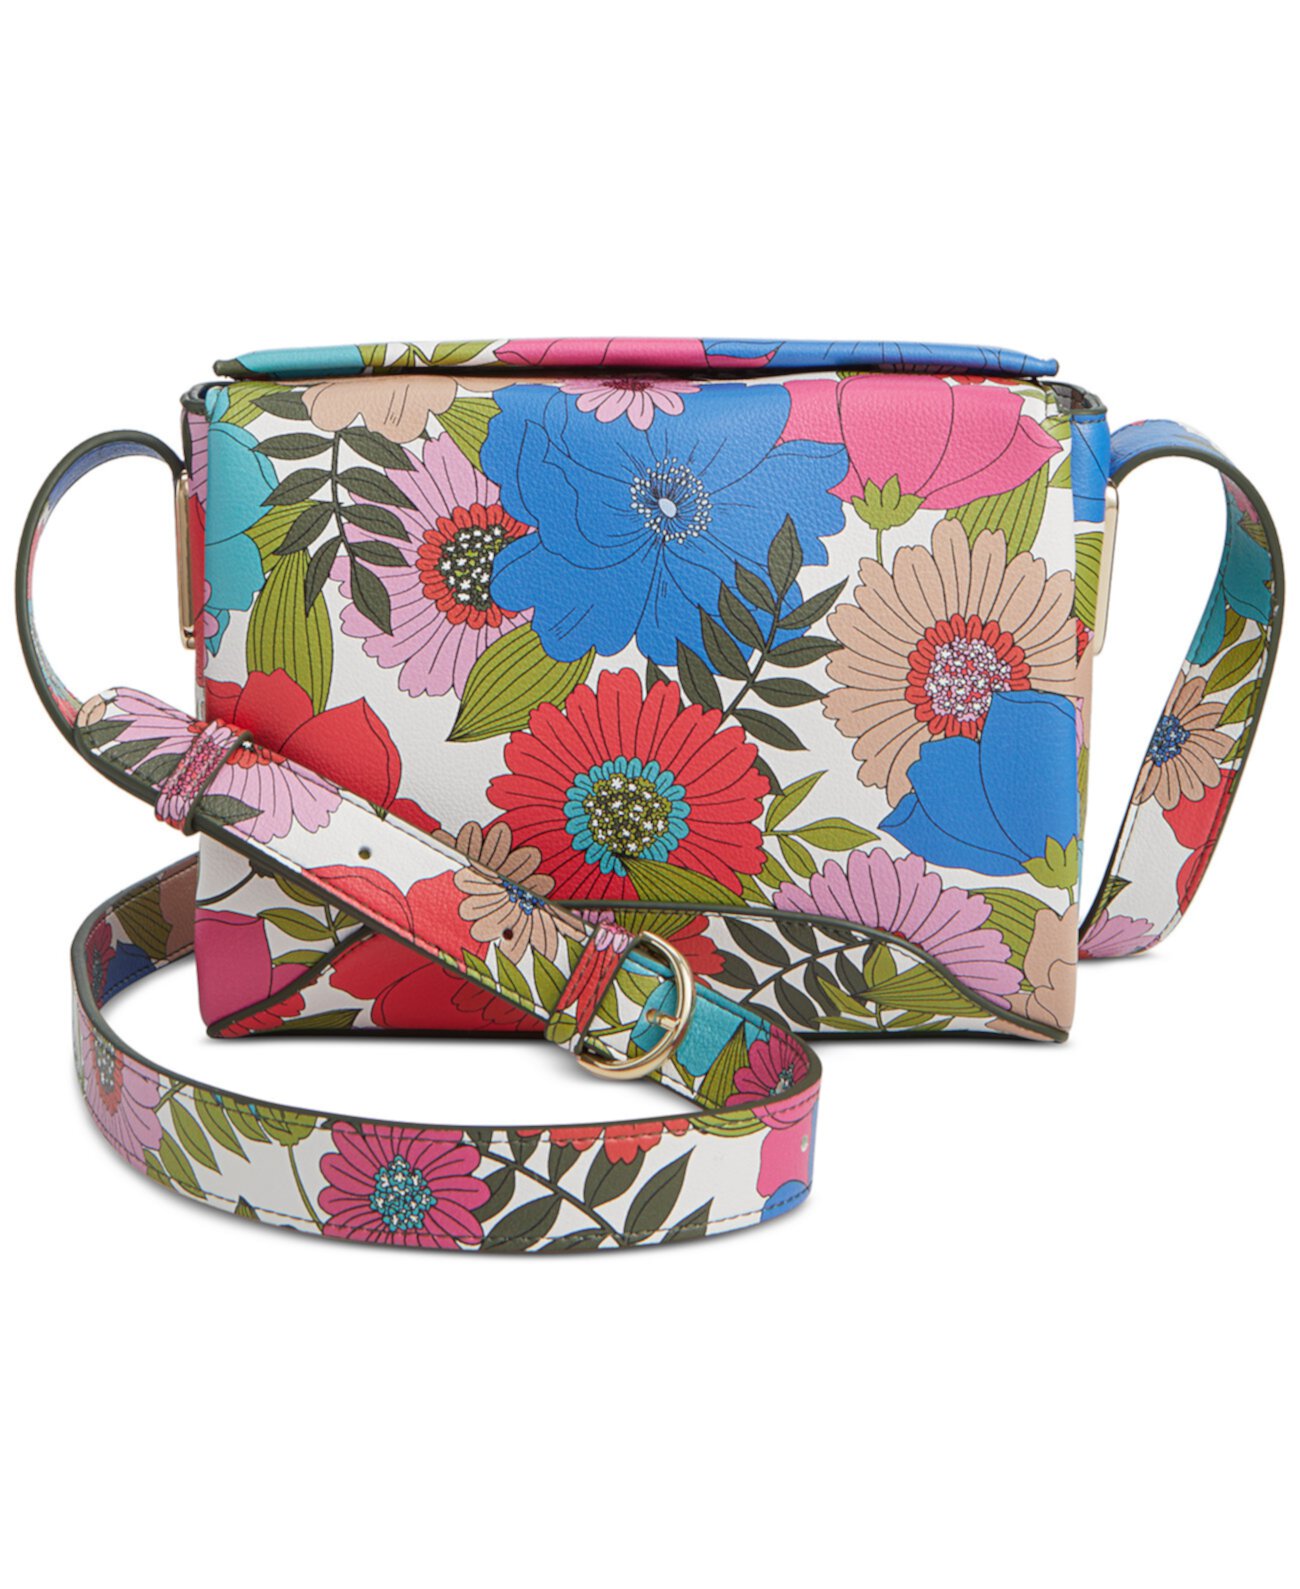 Leslii Printed Crossbody Bag, Created for Macy's On 34th